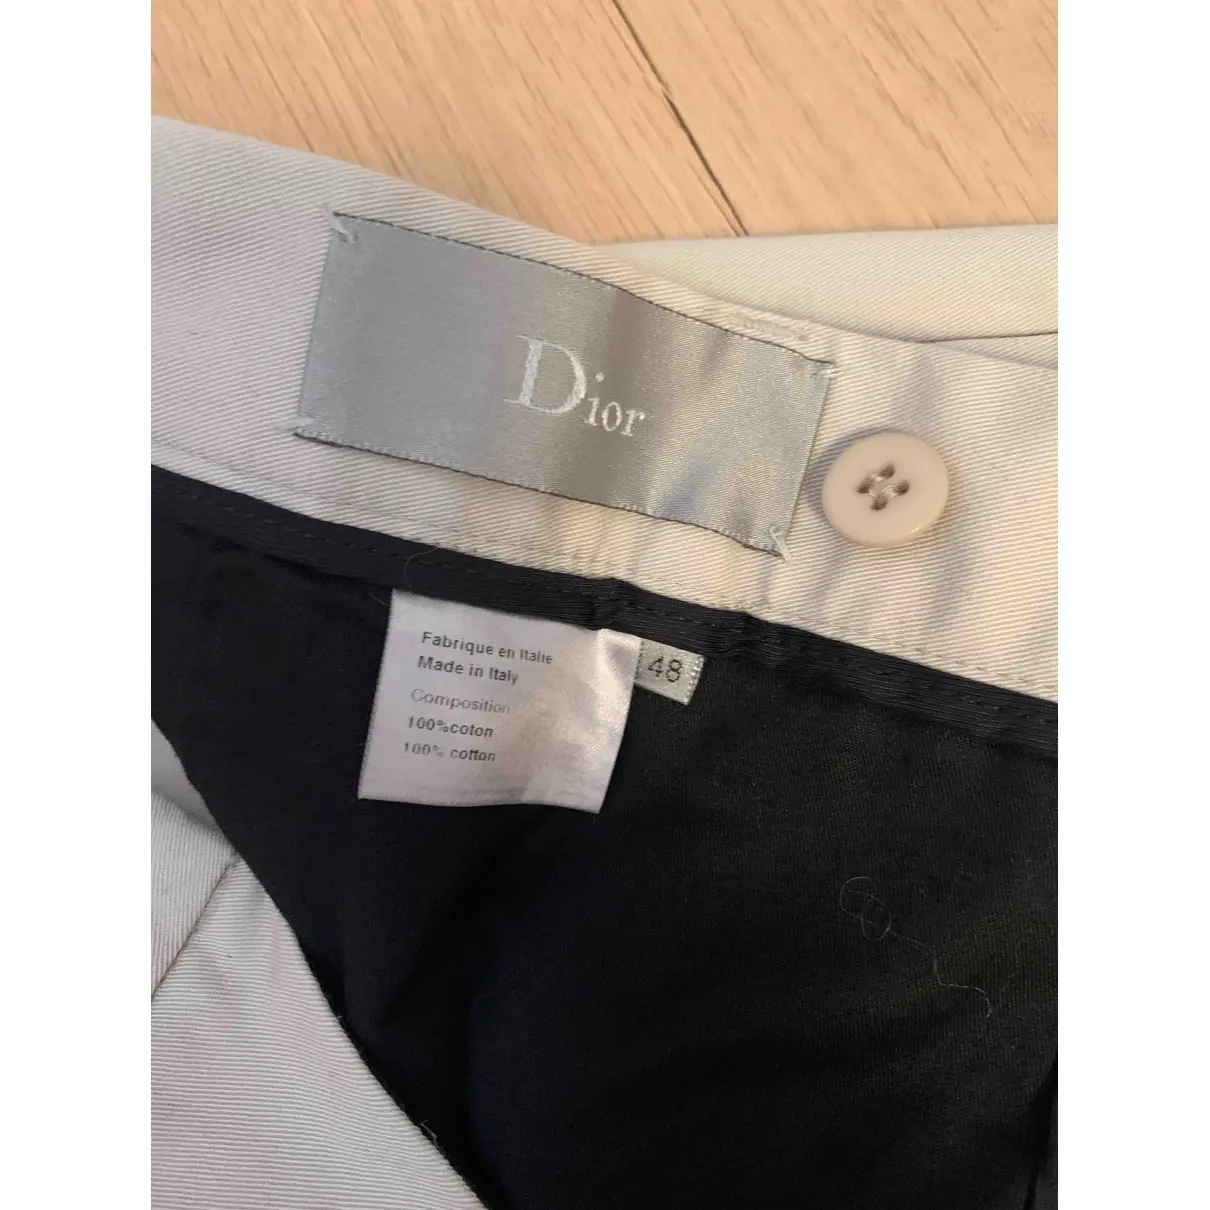 Luxury Dior Homme Trousers Men